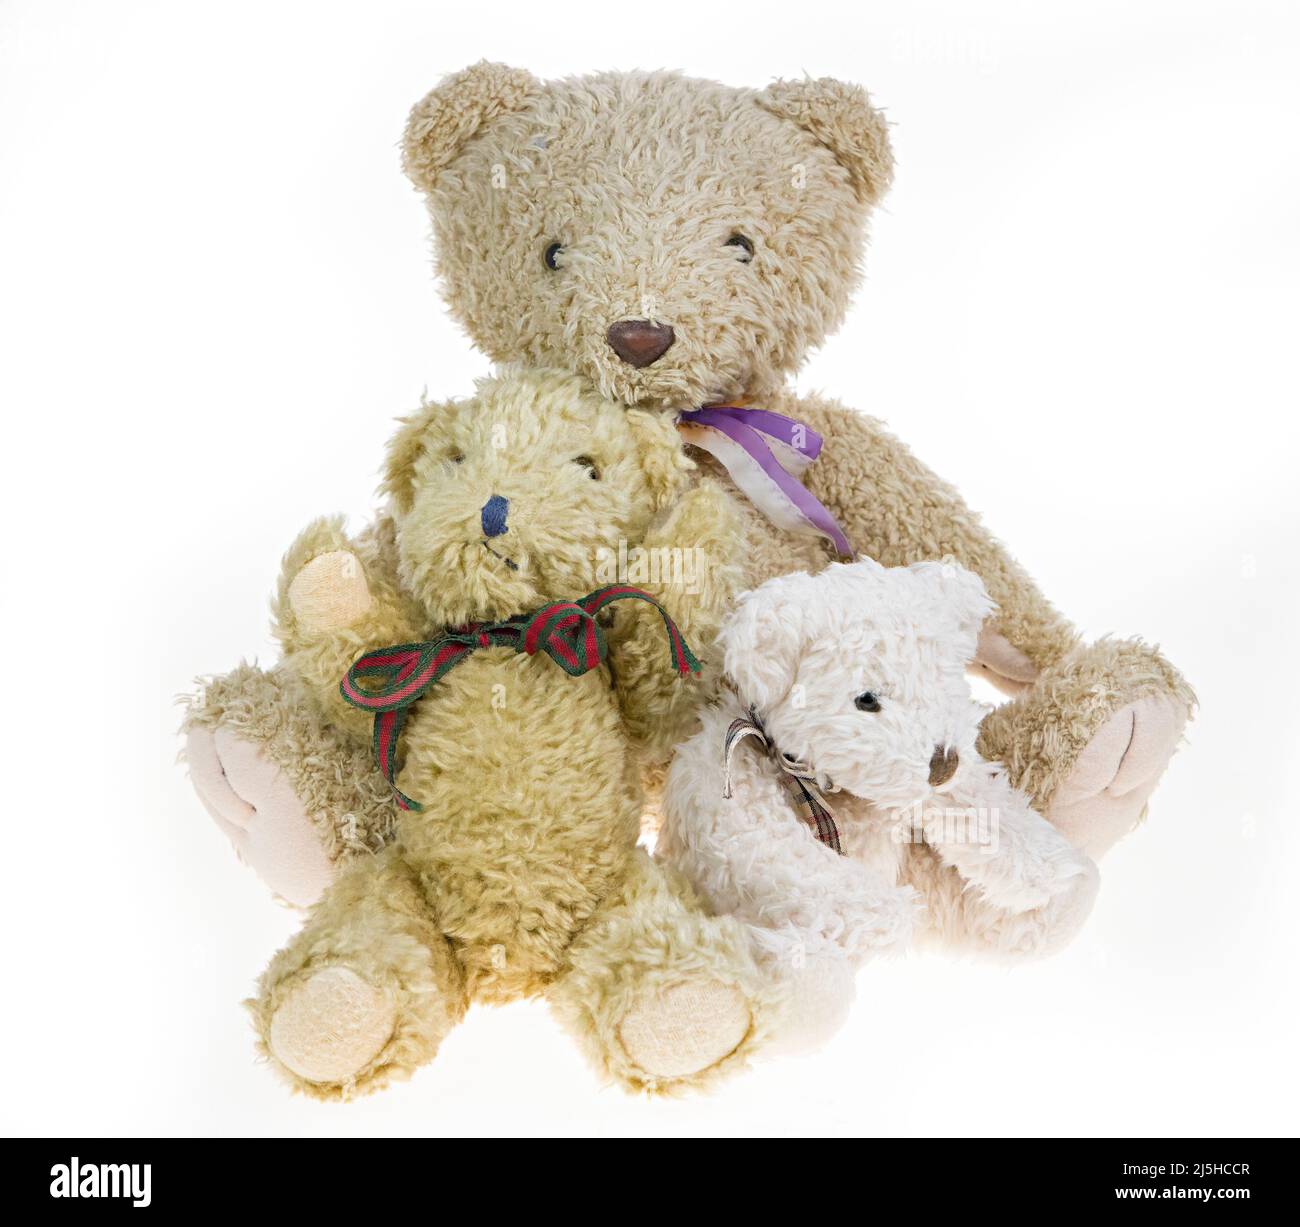 Worn and loved teddy bears Stock Photo